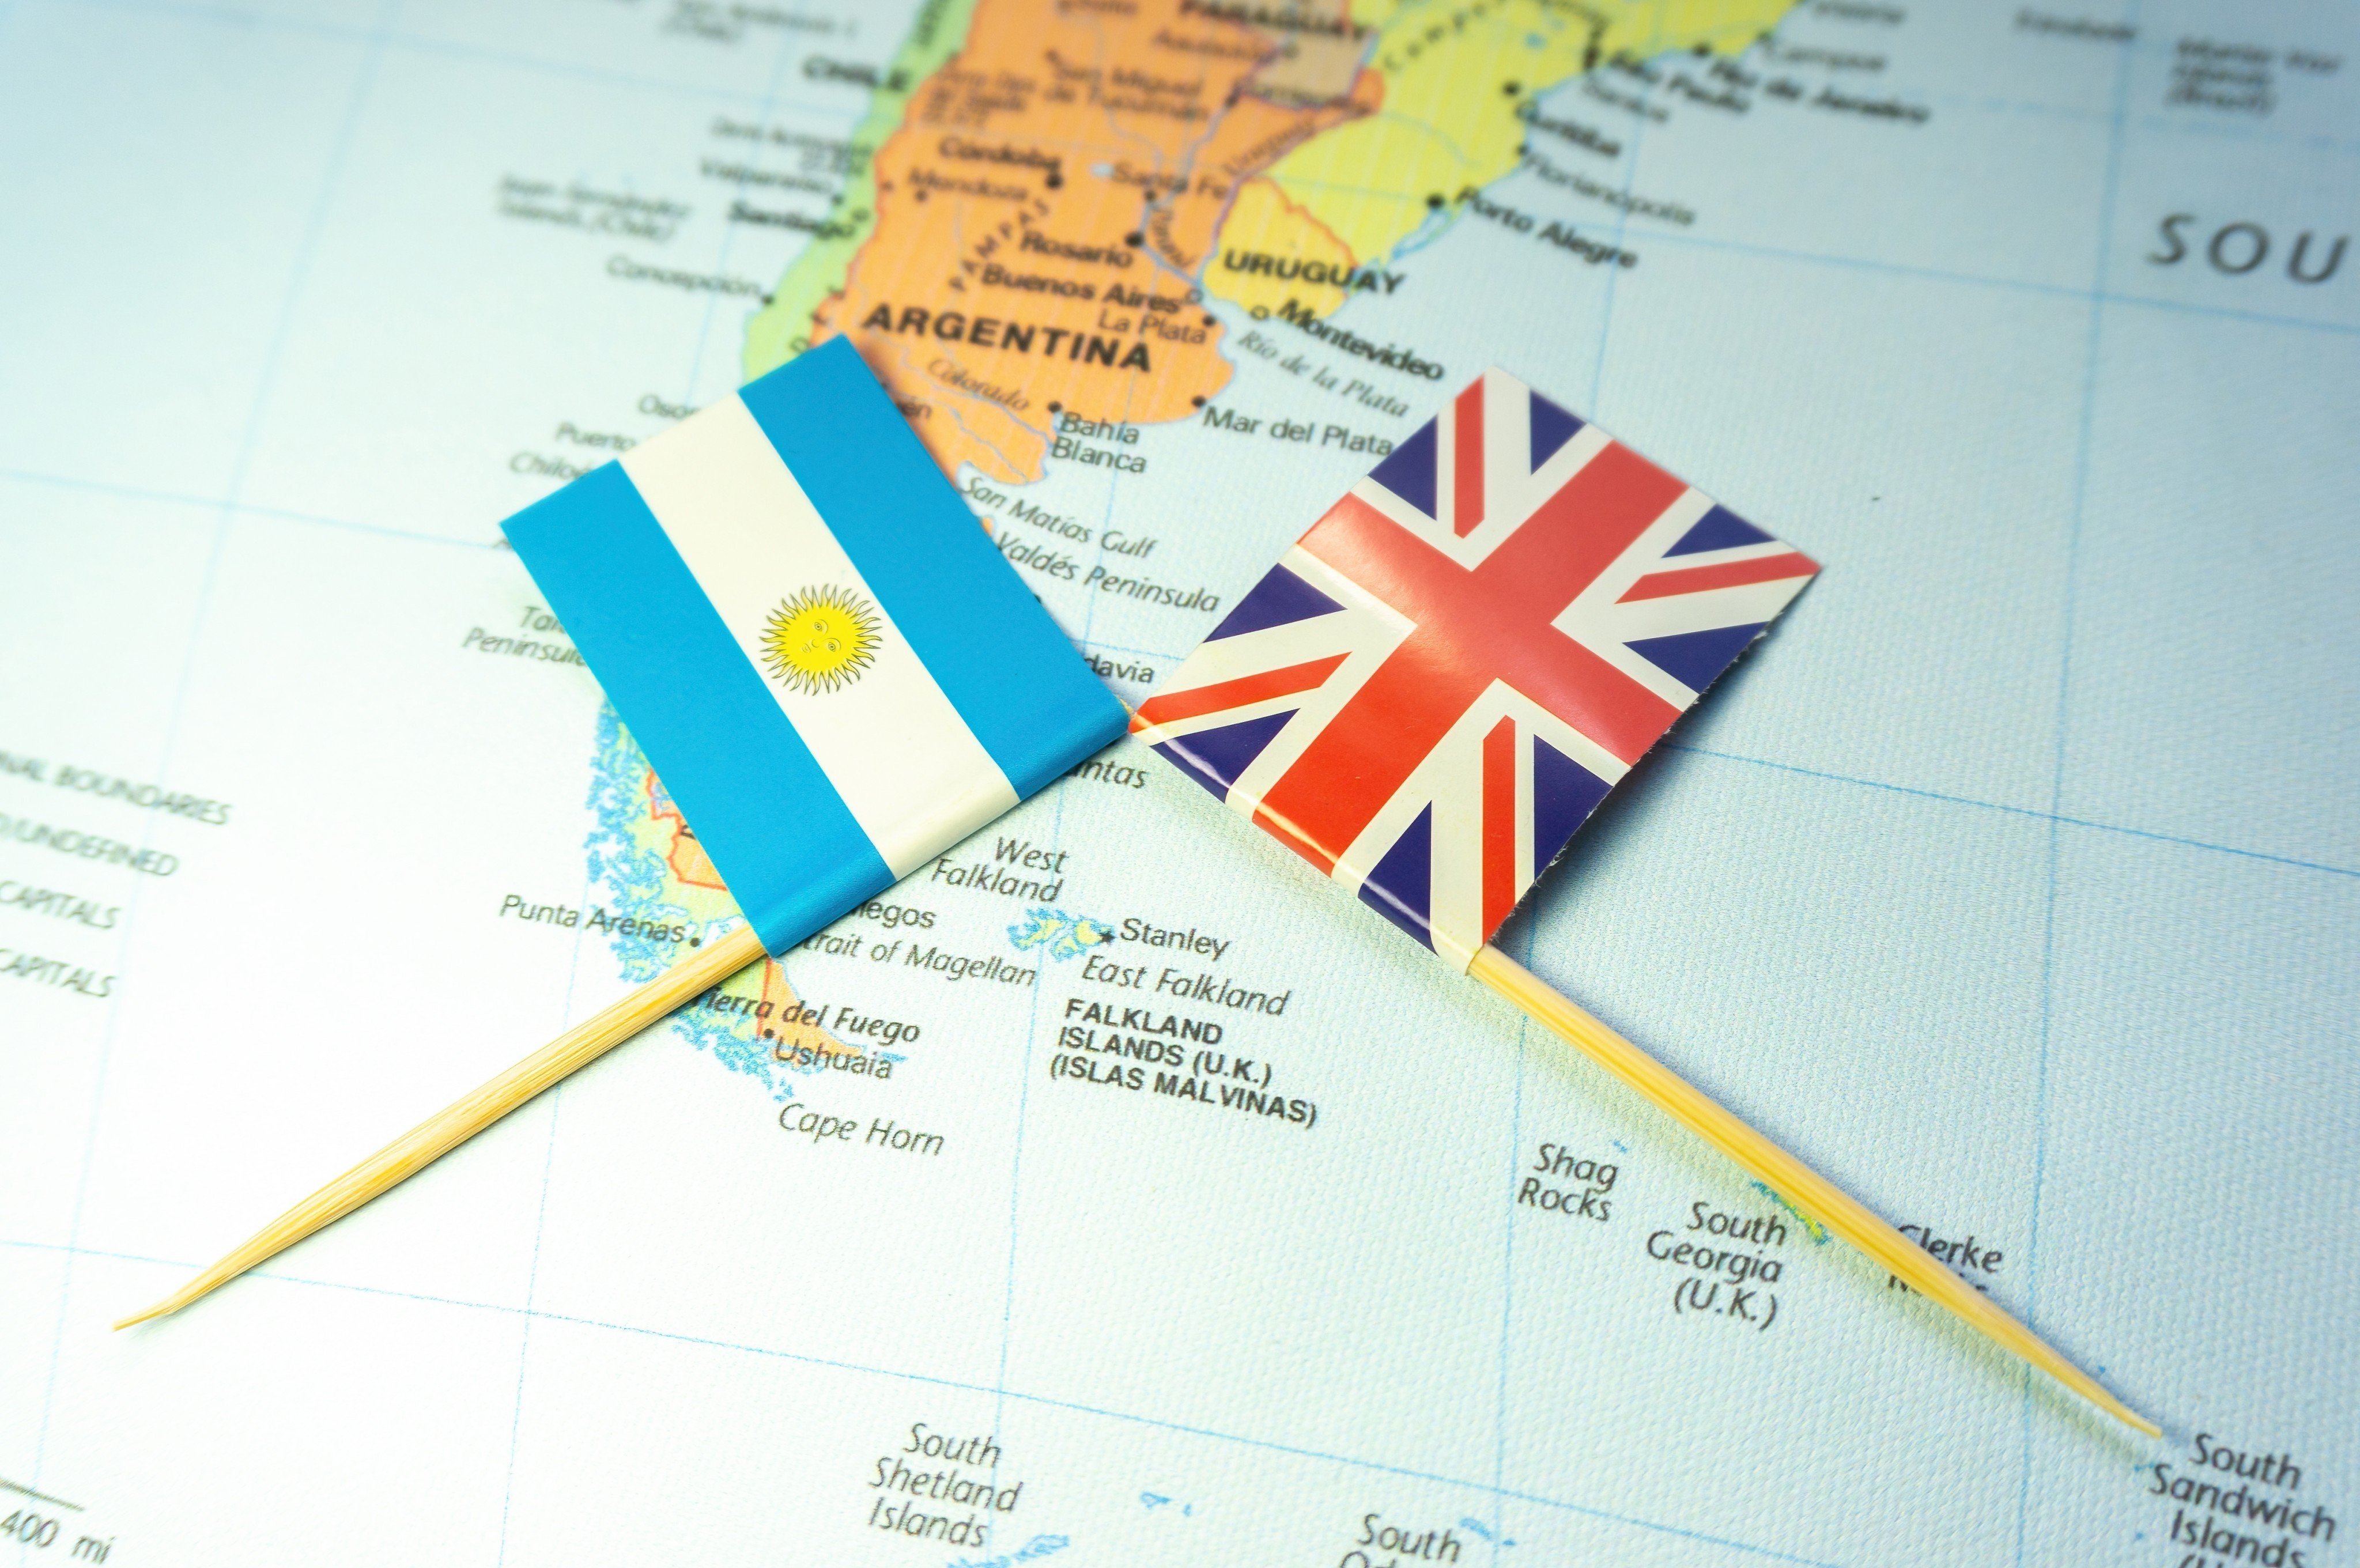 Argentine and British flags placed around the Falkland Islands or the Malvinas Islands. Photo: Shutterstock